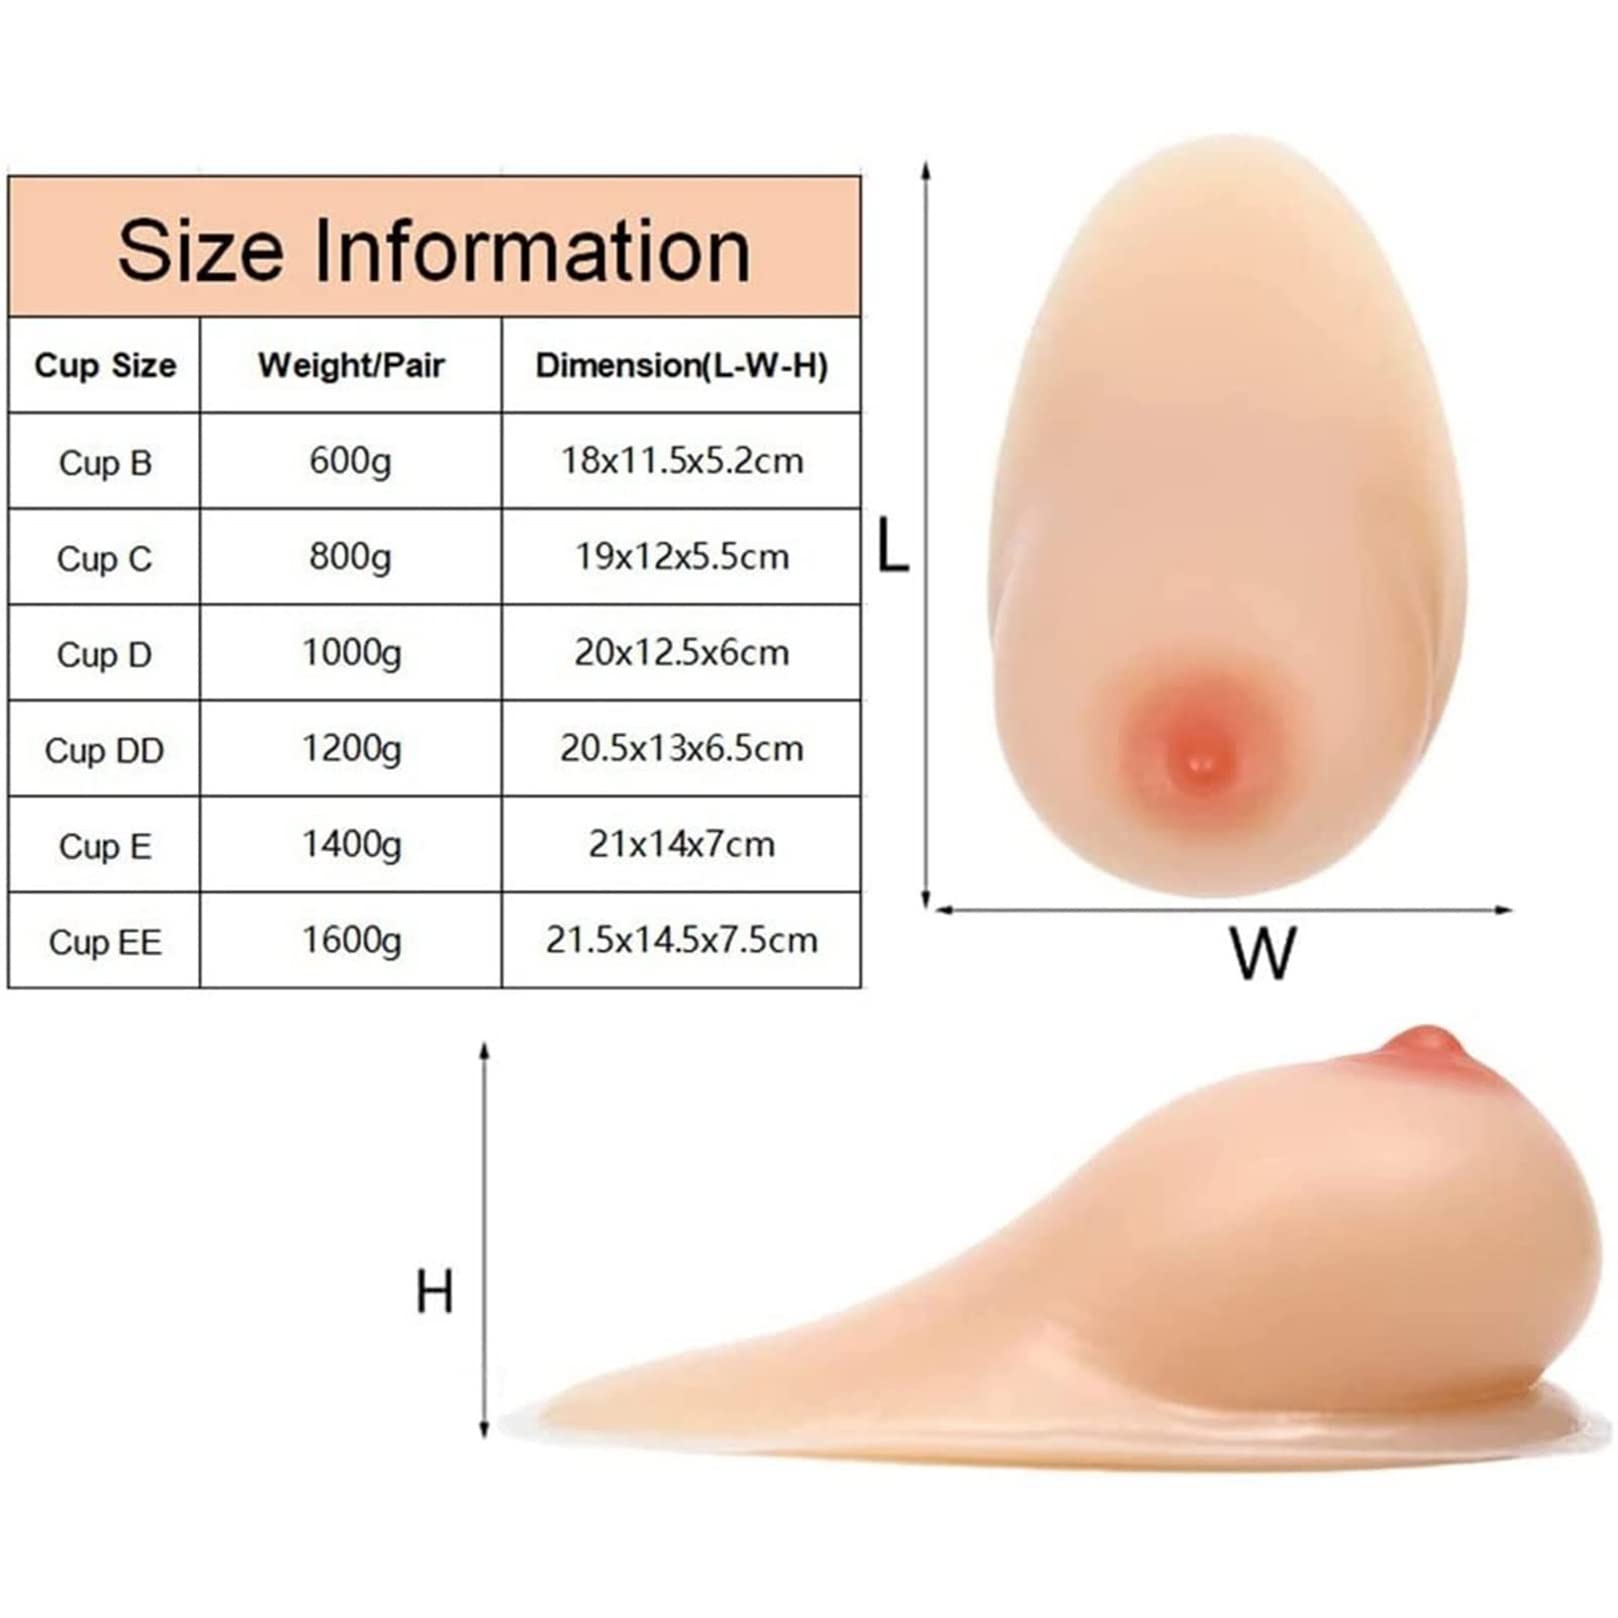 LORGL Self Adhesive Silicone Breast Forms Prosthetic Breast for Transgender Mastectomy Fake Breasts for Woman Chest Improvemen